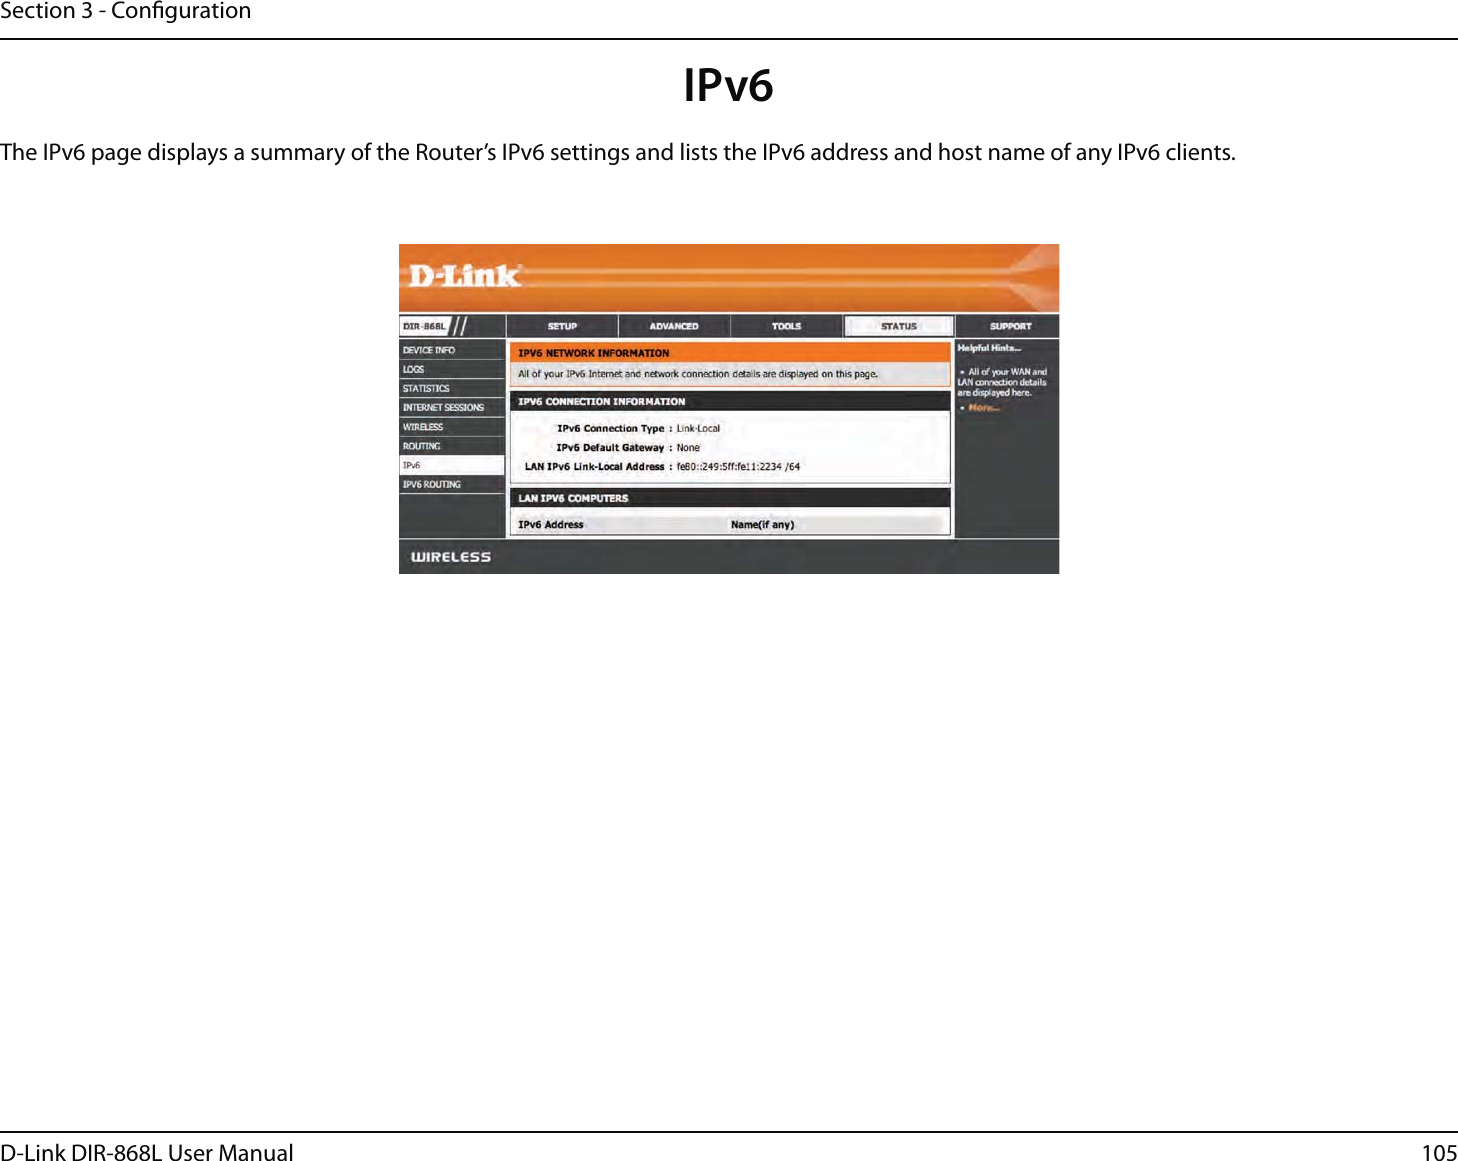 105D-Link DIR-868L User ManualSection 3 - CongurationIPv6The IPv6 page displays a summary of the Router’s IPv6 settings and lists the IPv6 address and host name of any IPv6 clients. 